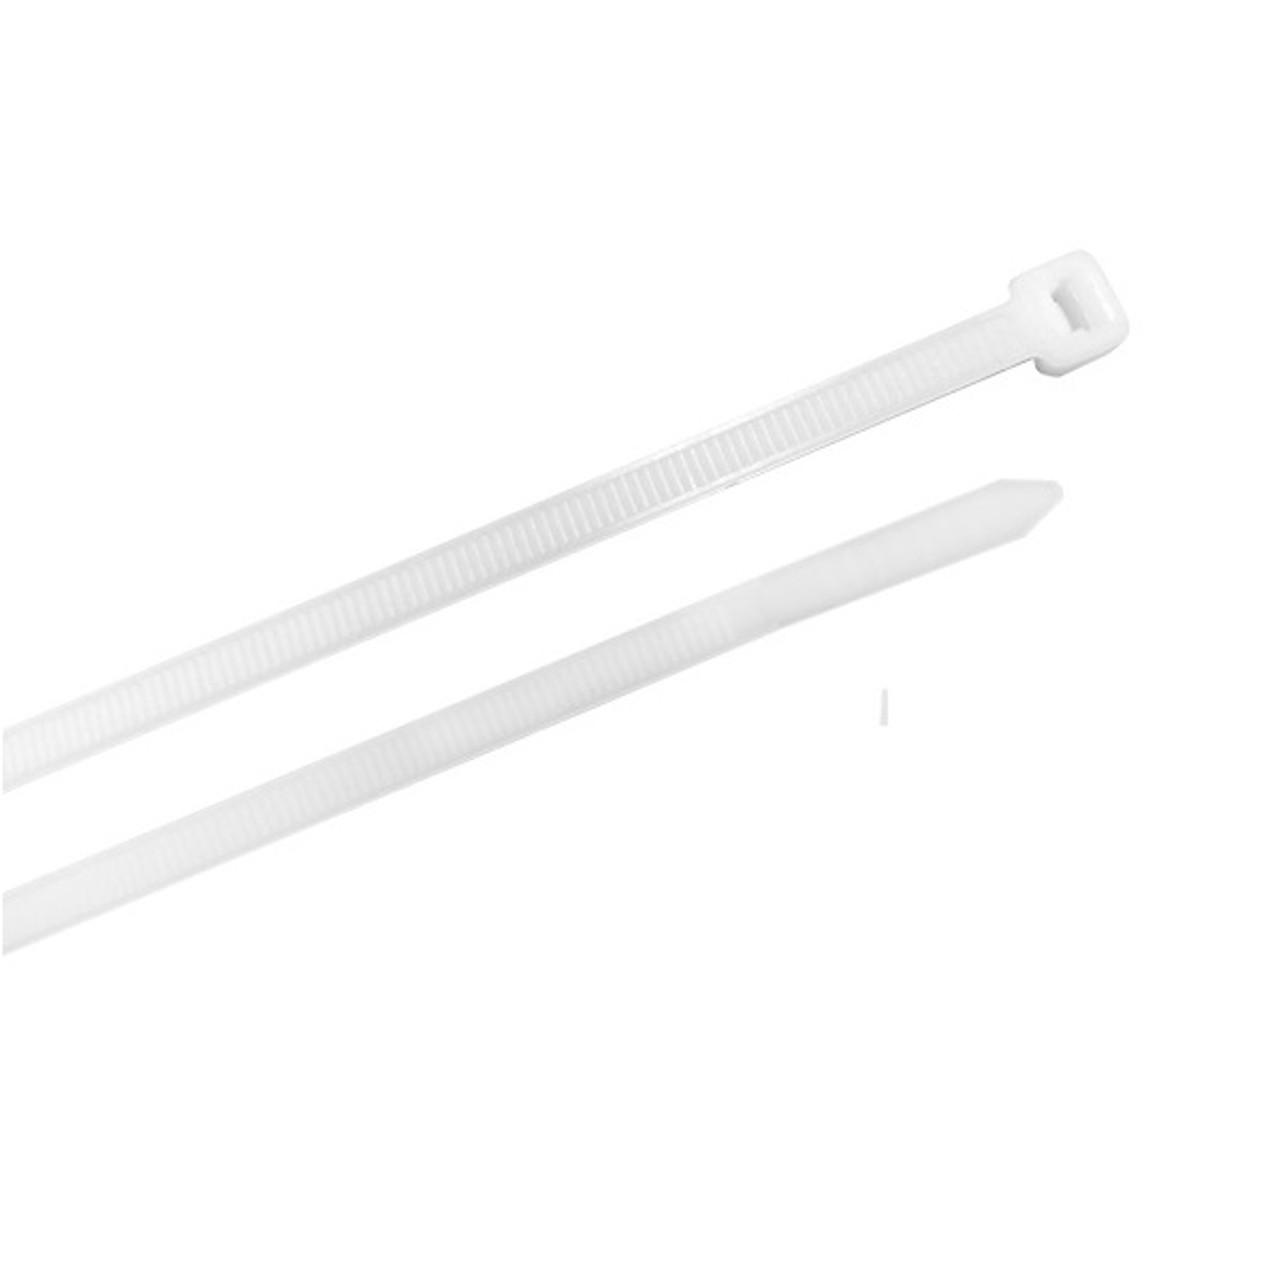 Stanley 11-Inch Multi-Purpose Cable Ties - White (Pack of 100)